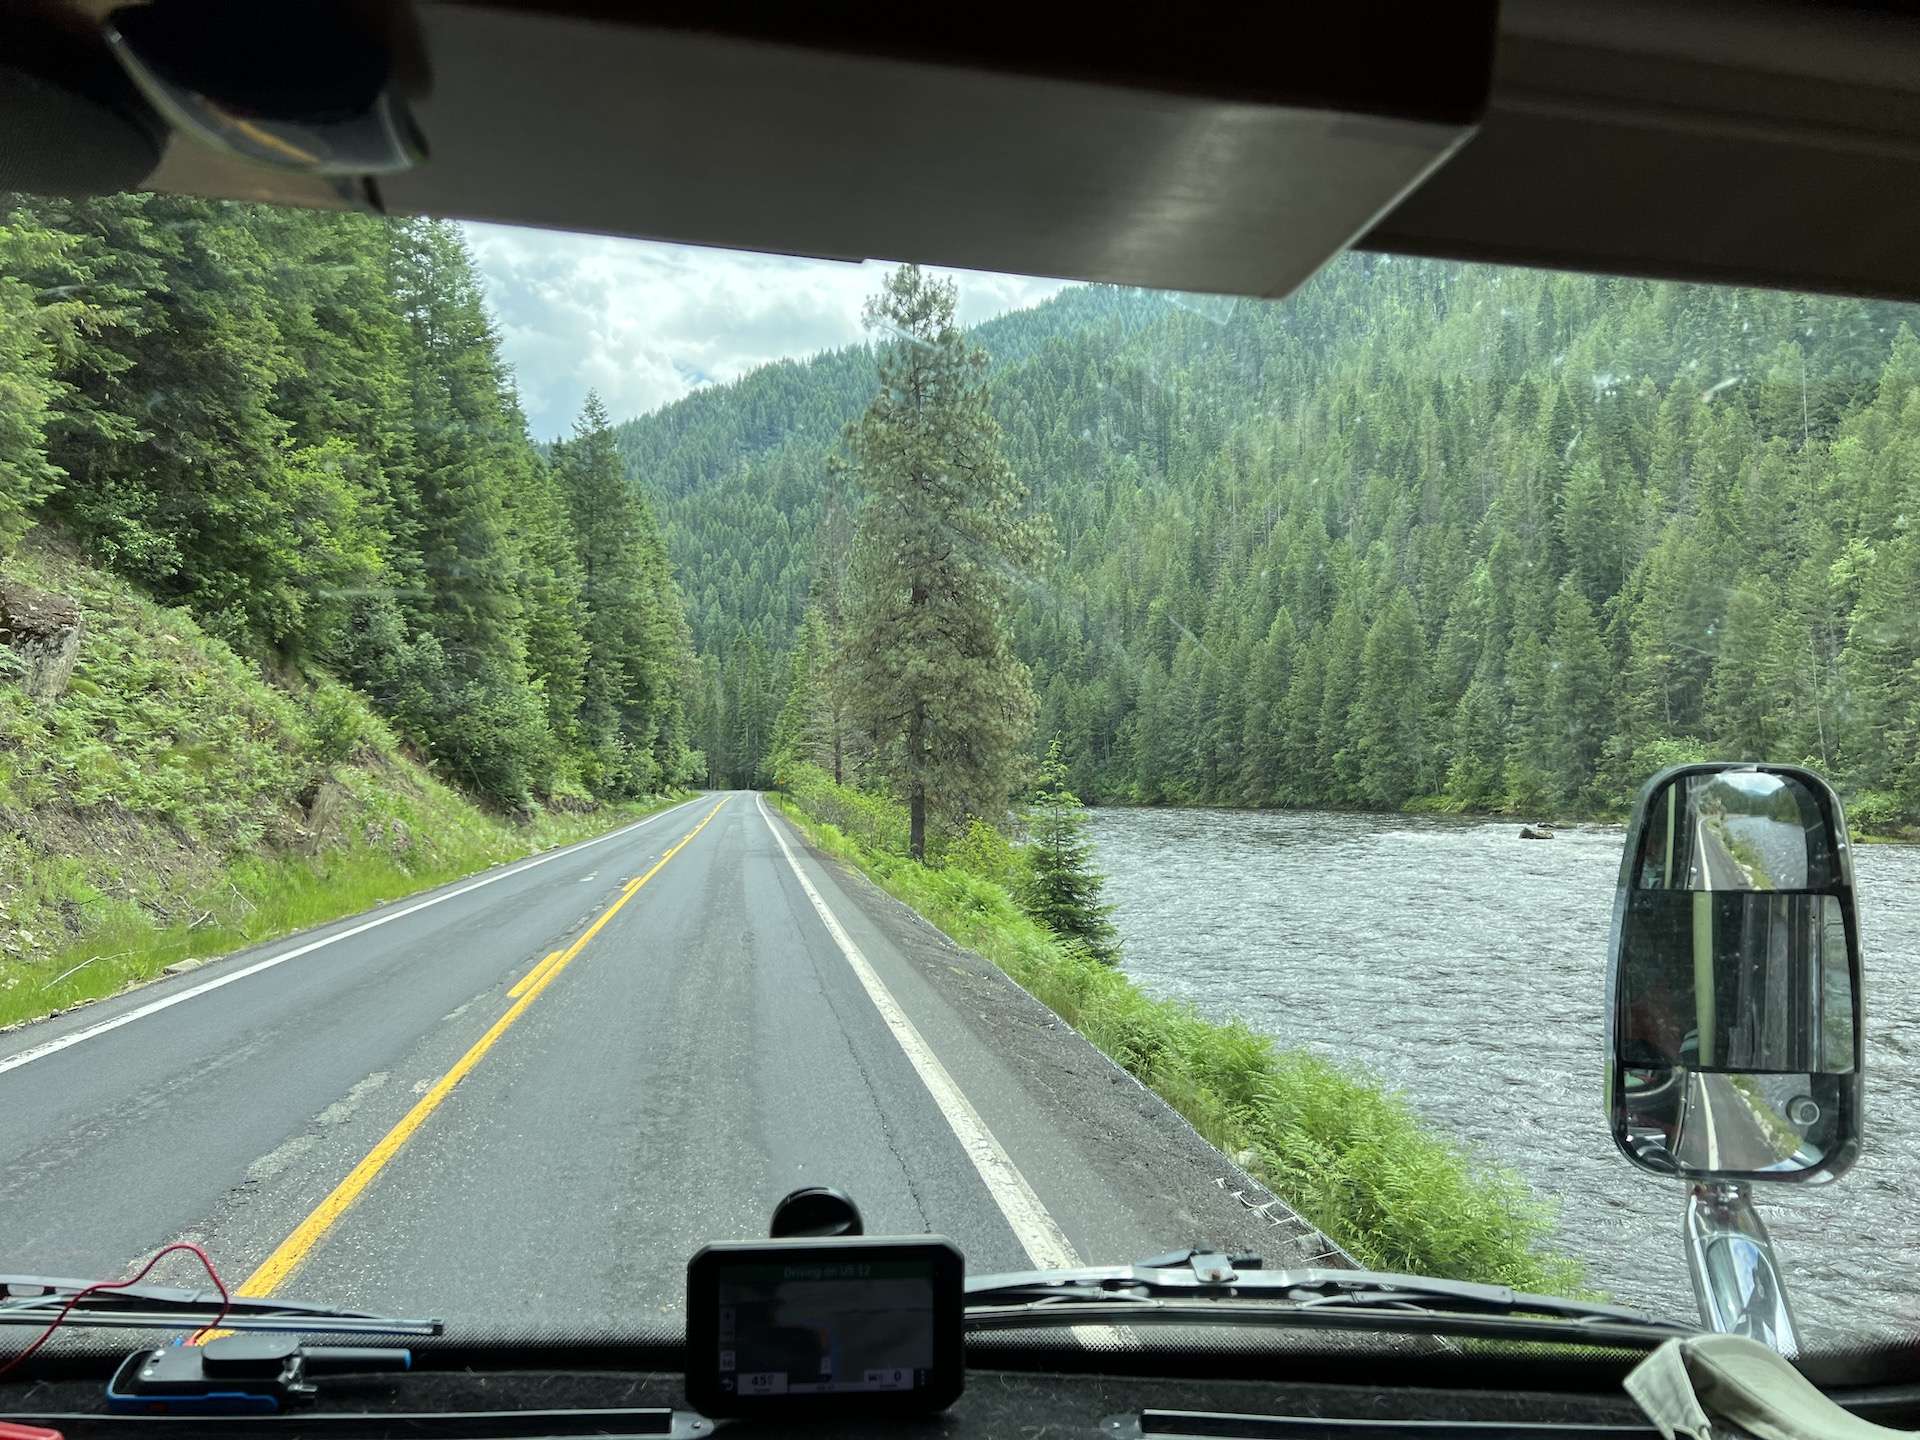 driving along the lochsa river a wild and scenic river in Idaho